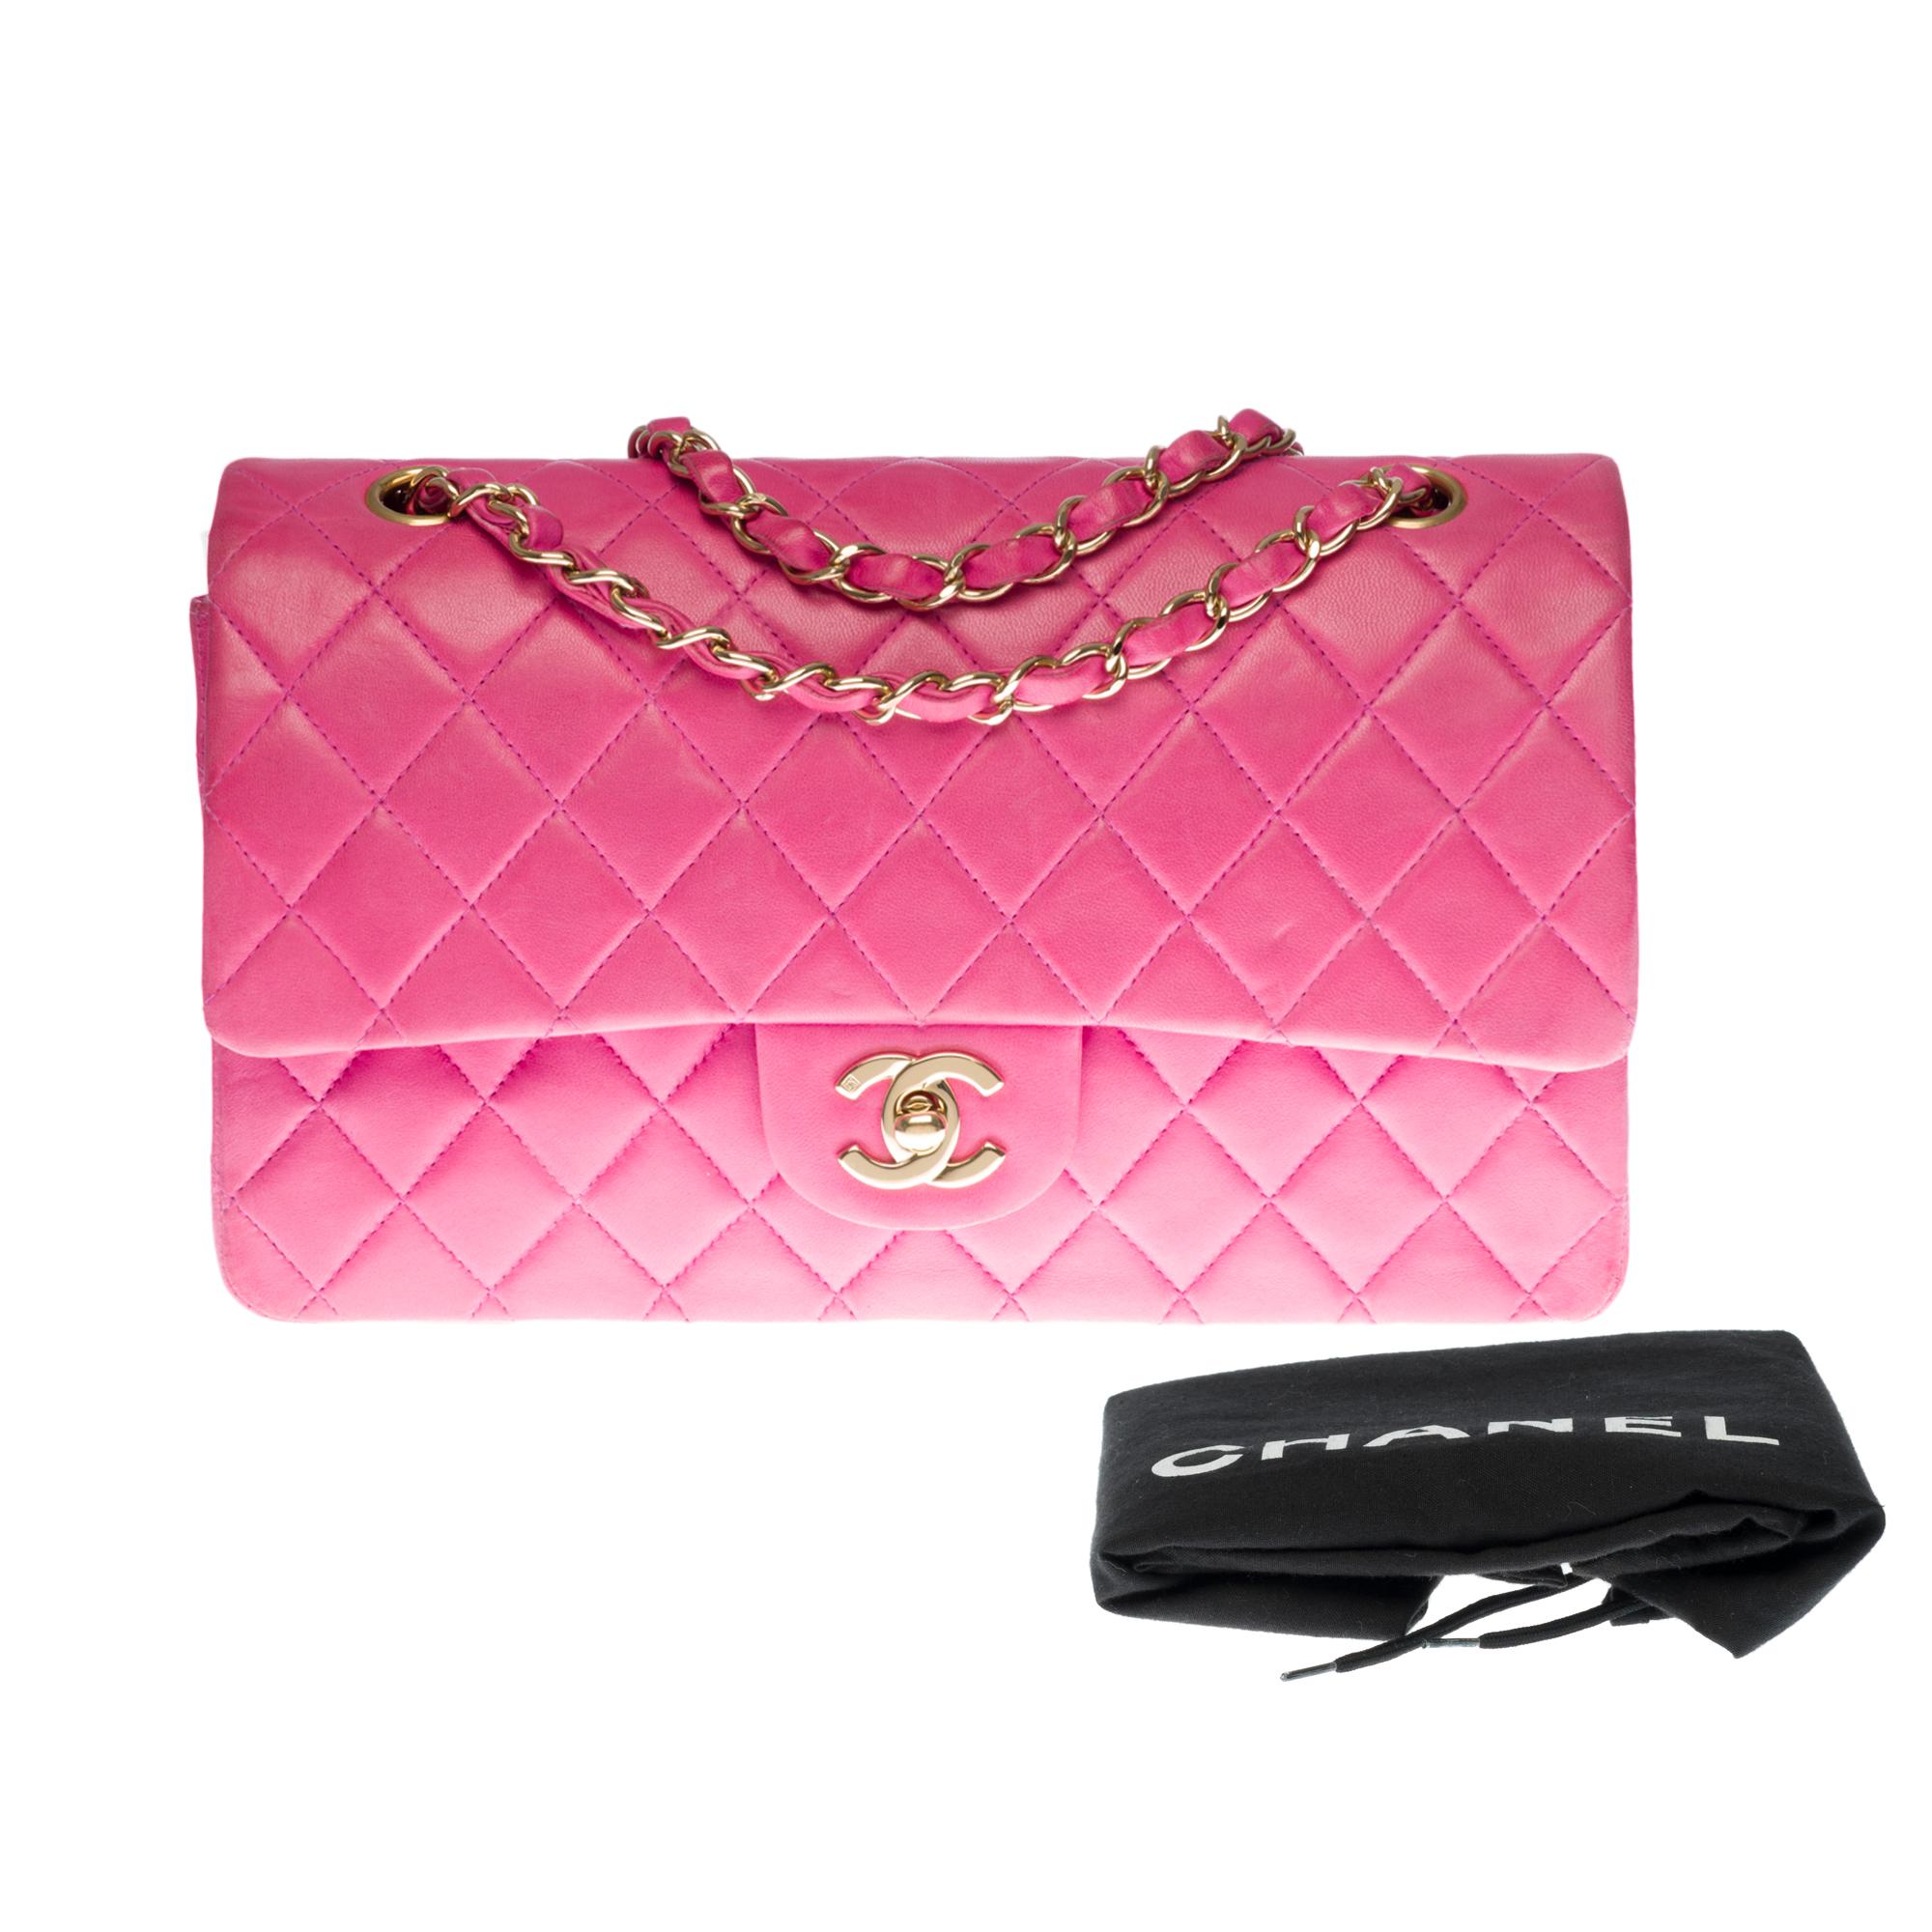 Chanel Timeless Medium double flap Shoulder bag in Pink quilted lambskin, SHW 5